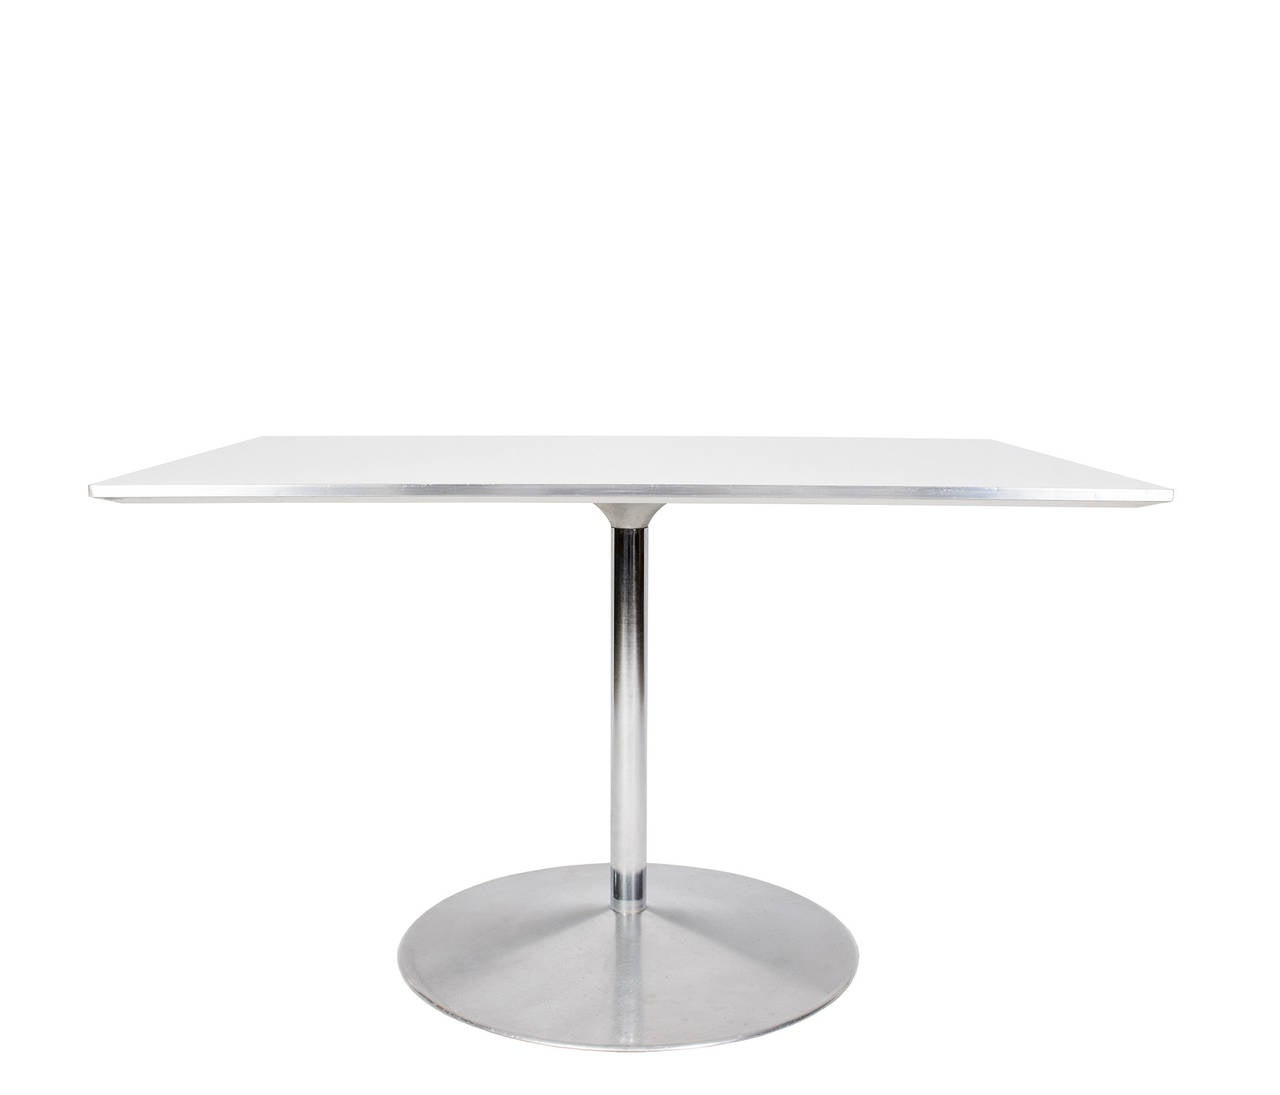 Verner Panton System 1-2-3 table designed in 1973 and produced by Fritz Hansen.